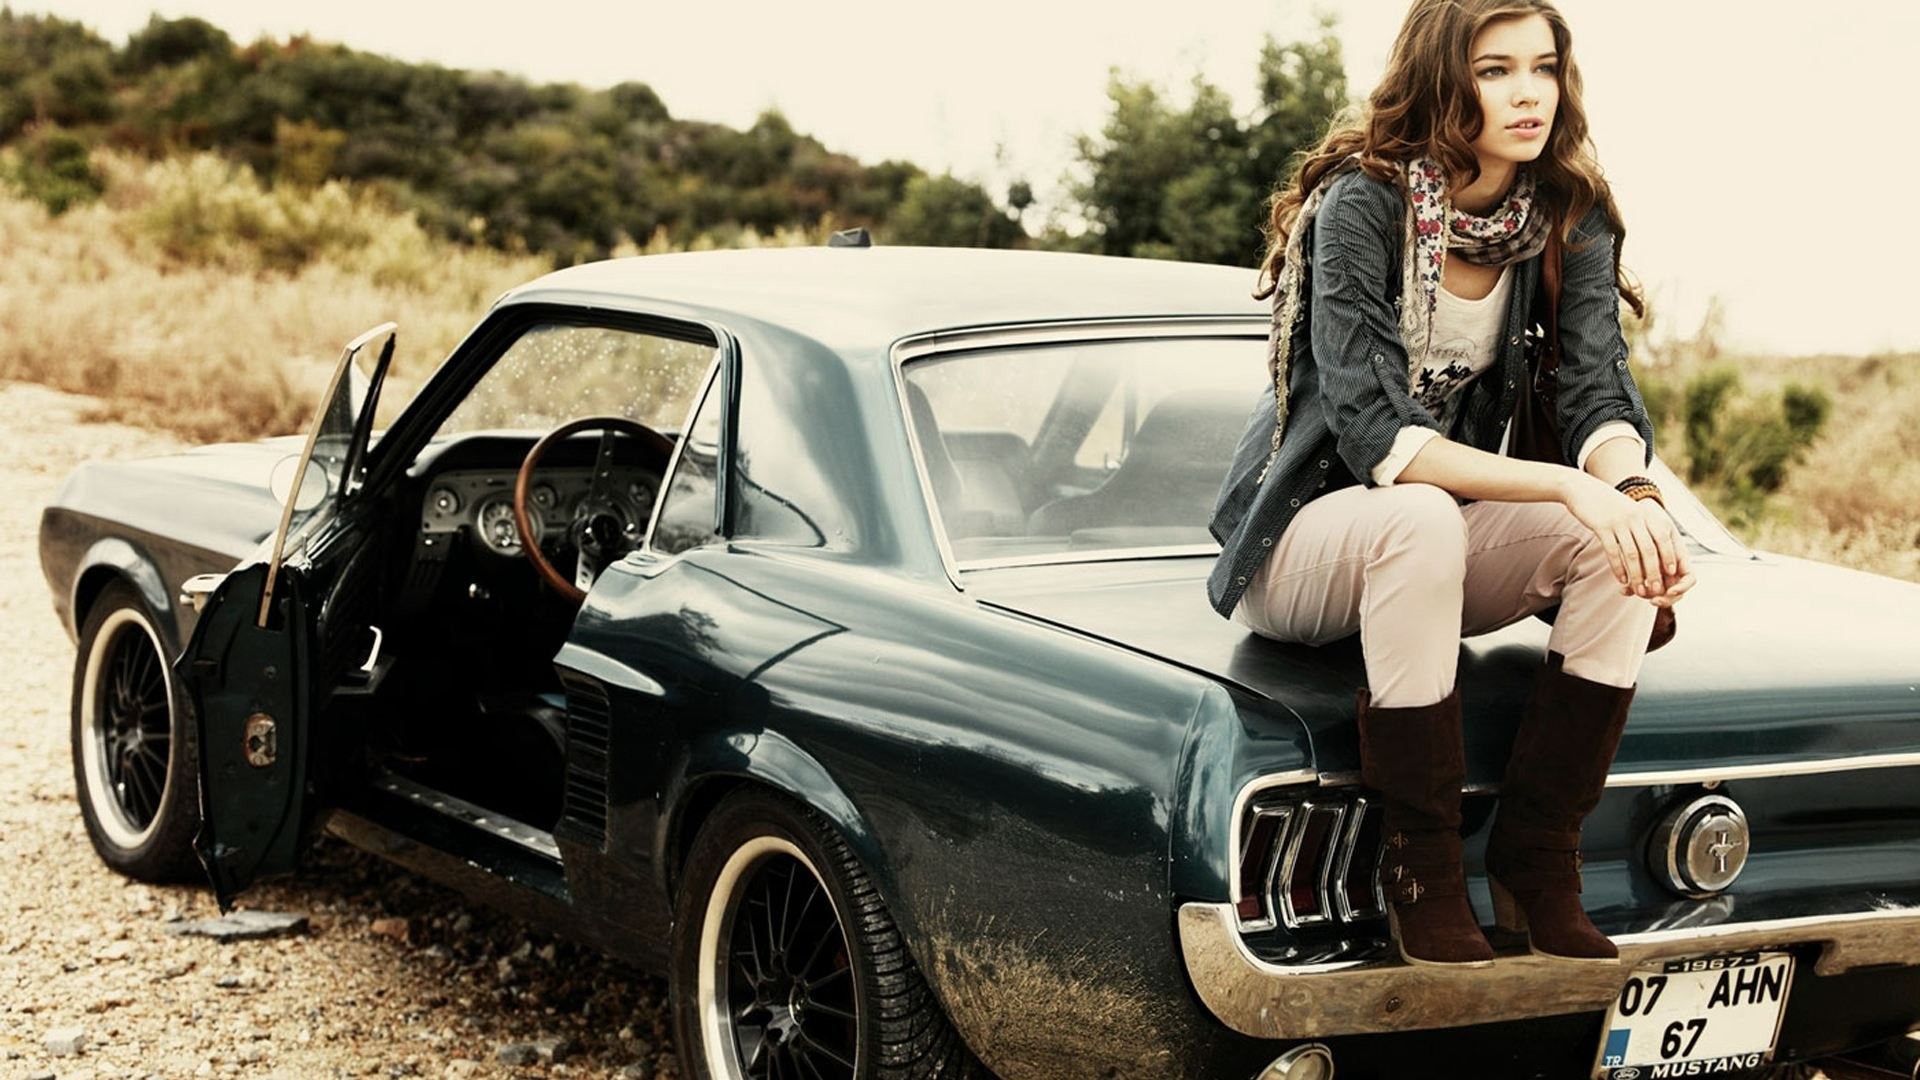 Ford Mustang, Car, Muscle Cars, Curly Hair, Brunette, Turkey, Women With Cars Wallpaper